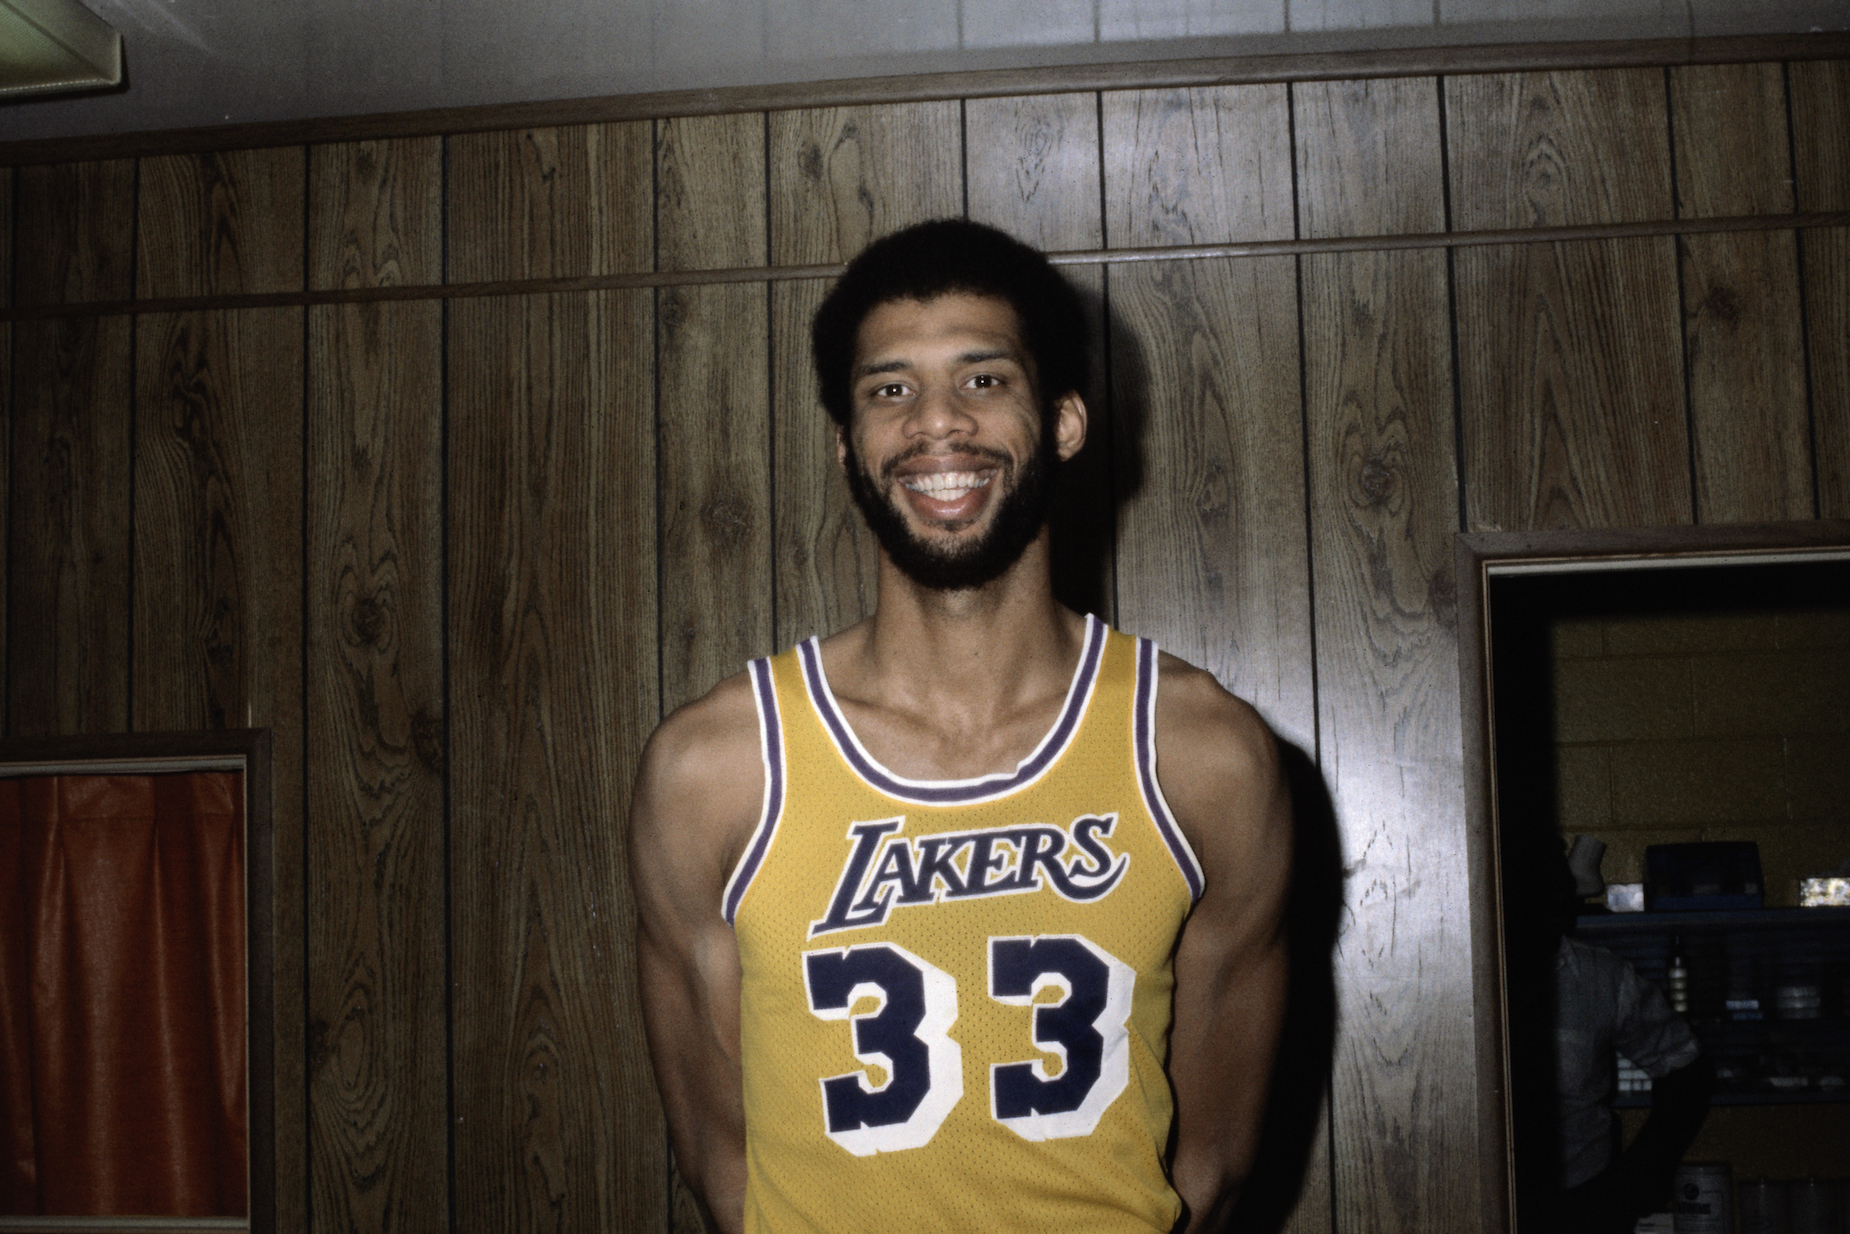 While Kareem Abdul-Jabbar is a living legend, he has some surprising human regrets about his transition to the pros.